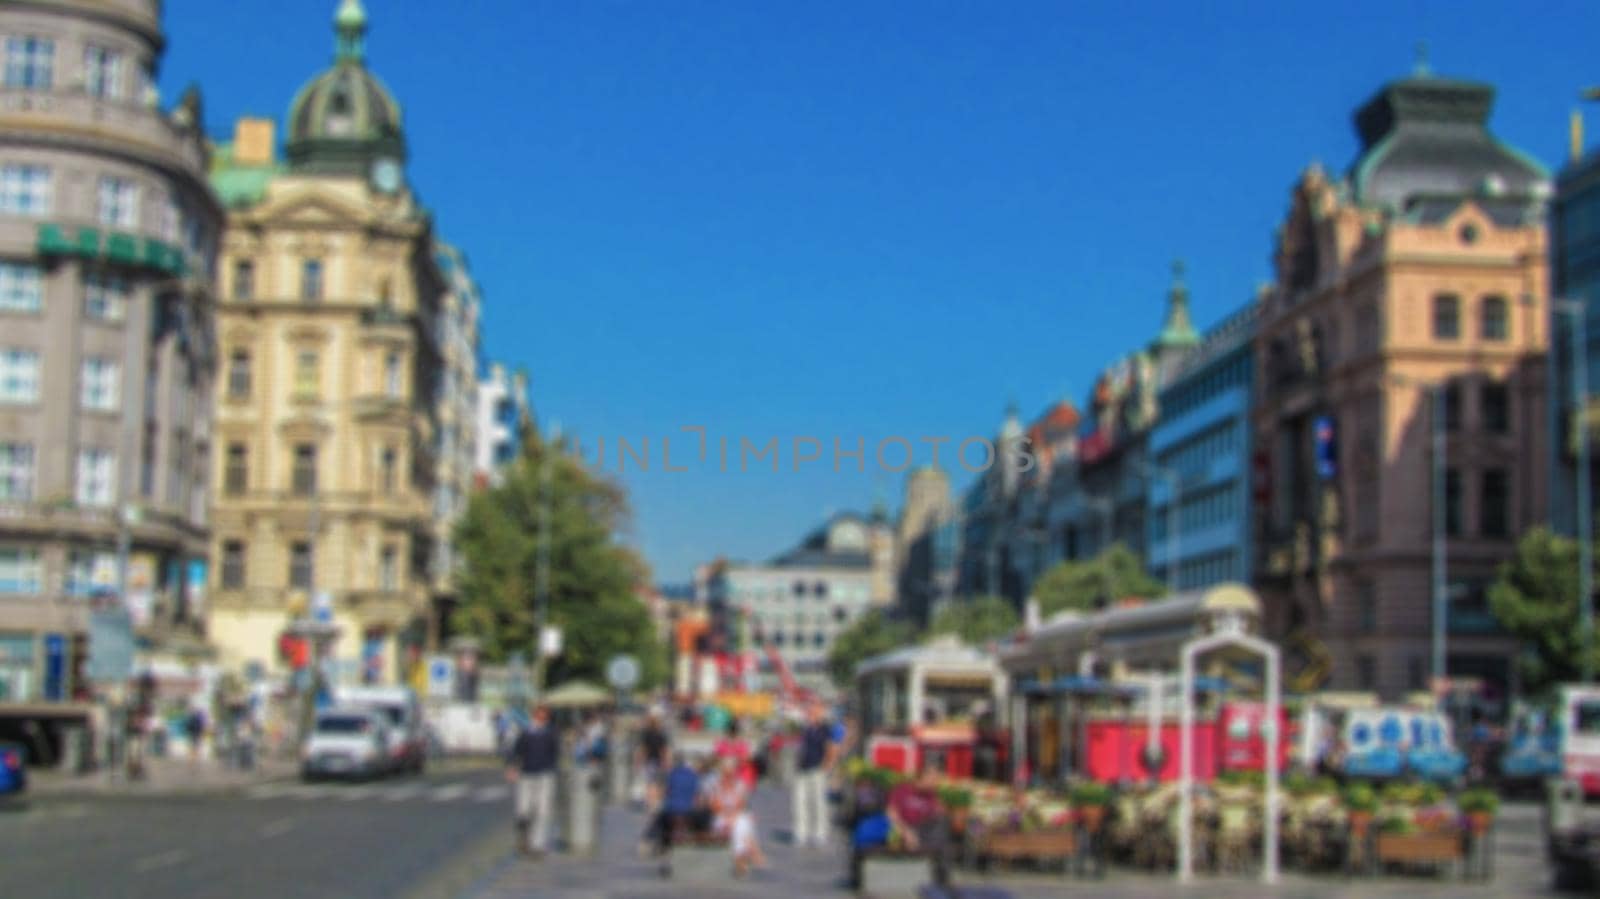 Blurred background. Urban landscape, city street. Creative story for a background, poster, banner, or screensaver.
